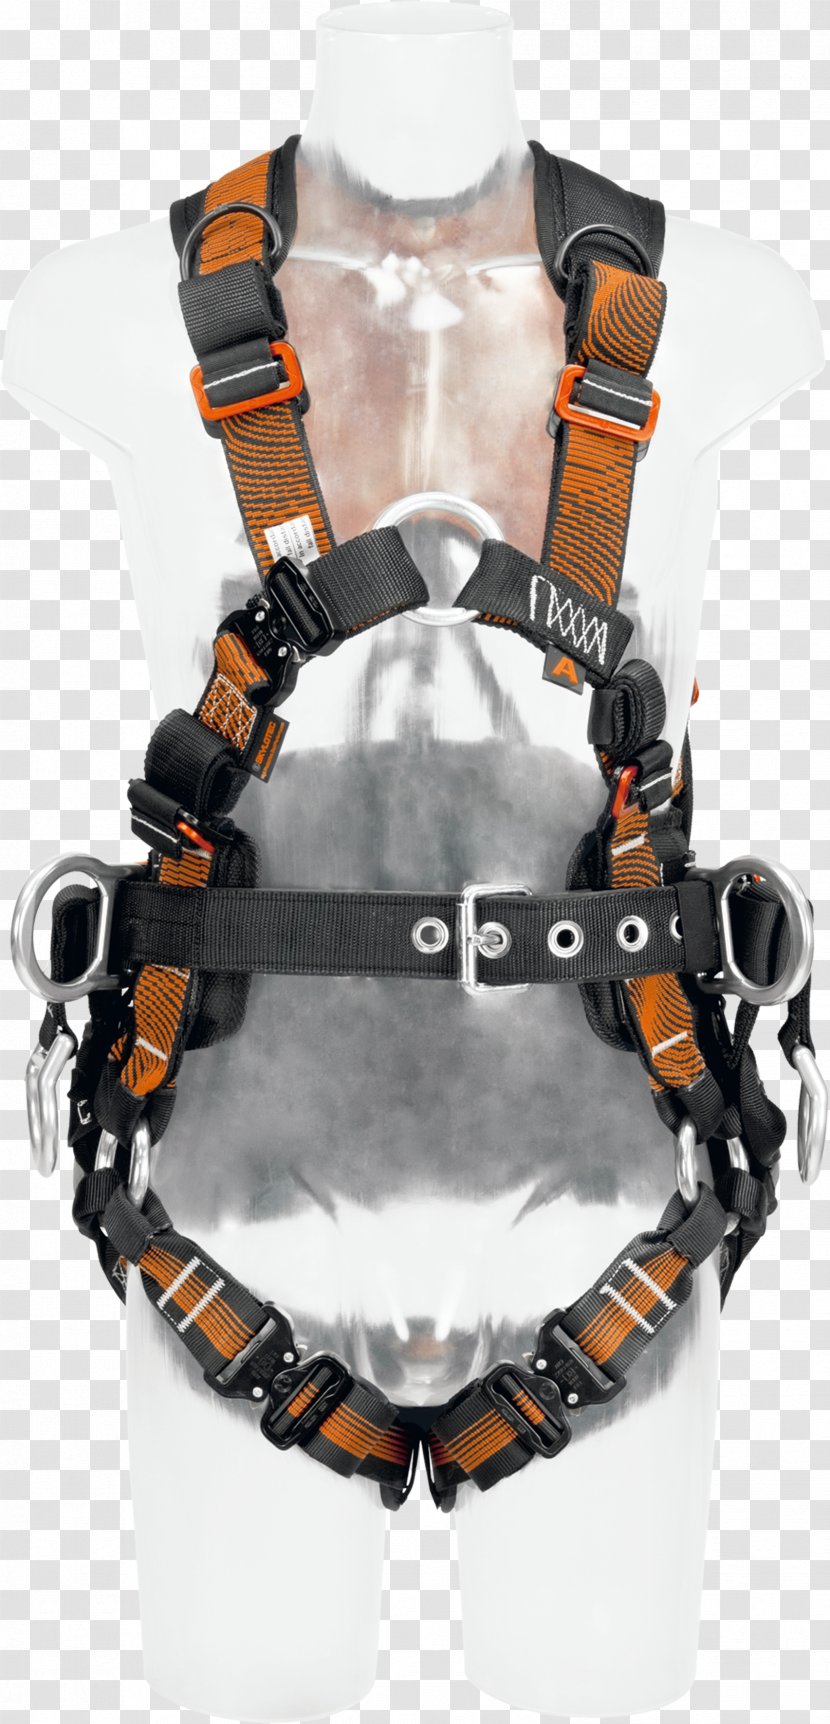 Climbing Harnesses Safety Harness SKYLOTEC Fall Arrest Personal Protective Equipment - Webbing - Rock Transparent PNG